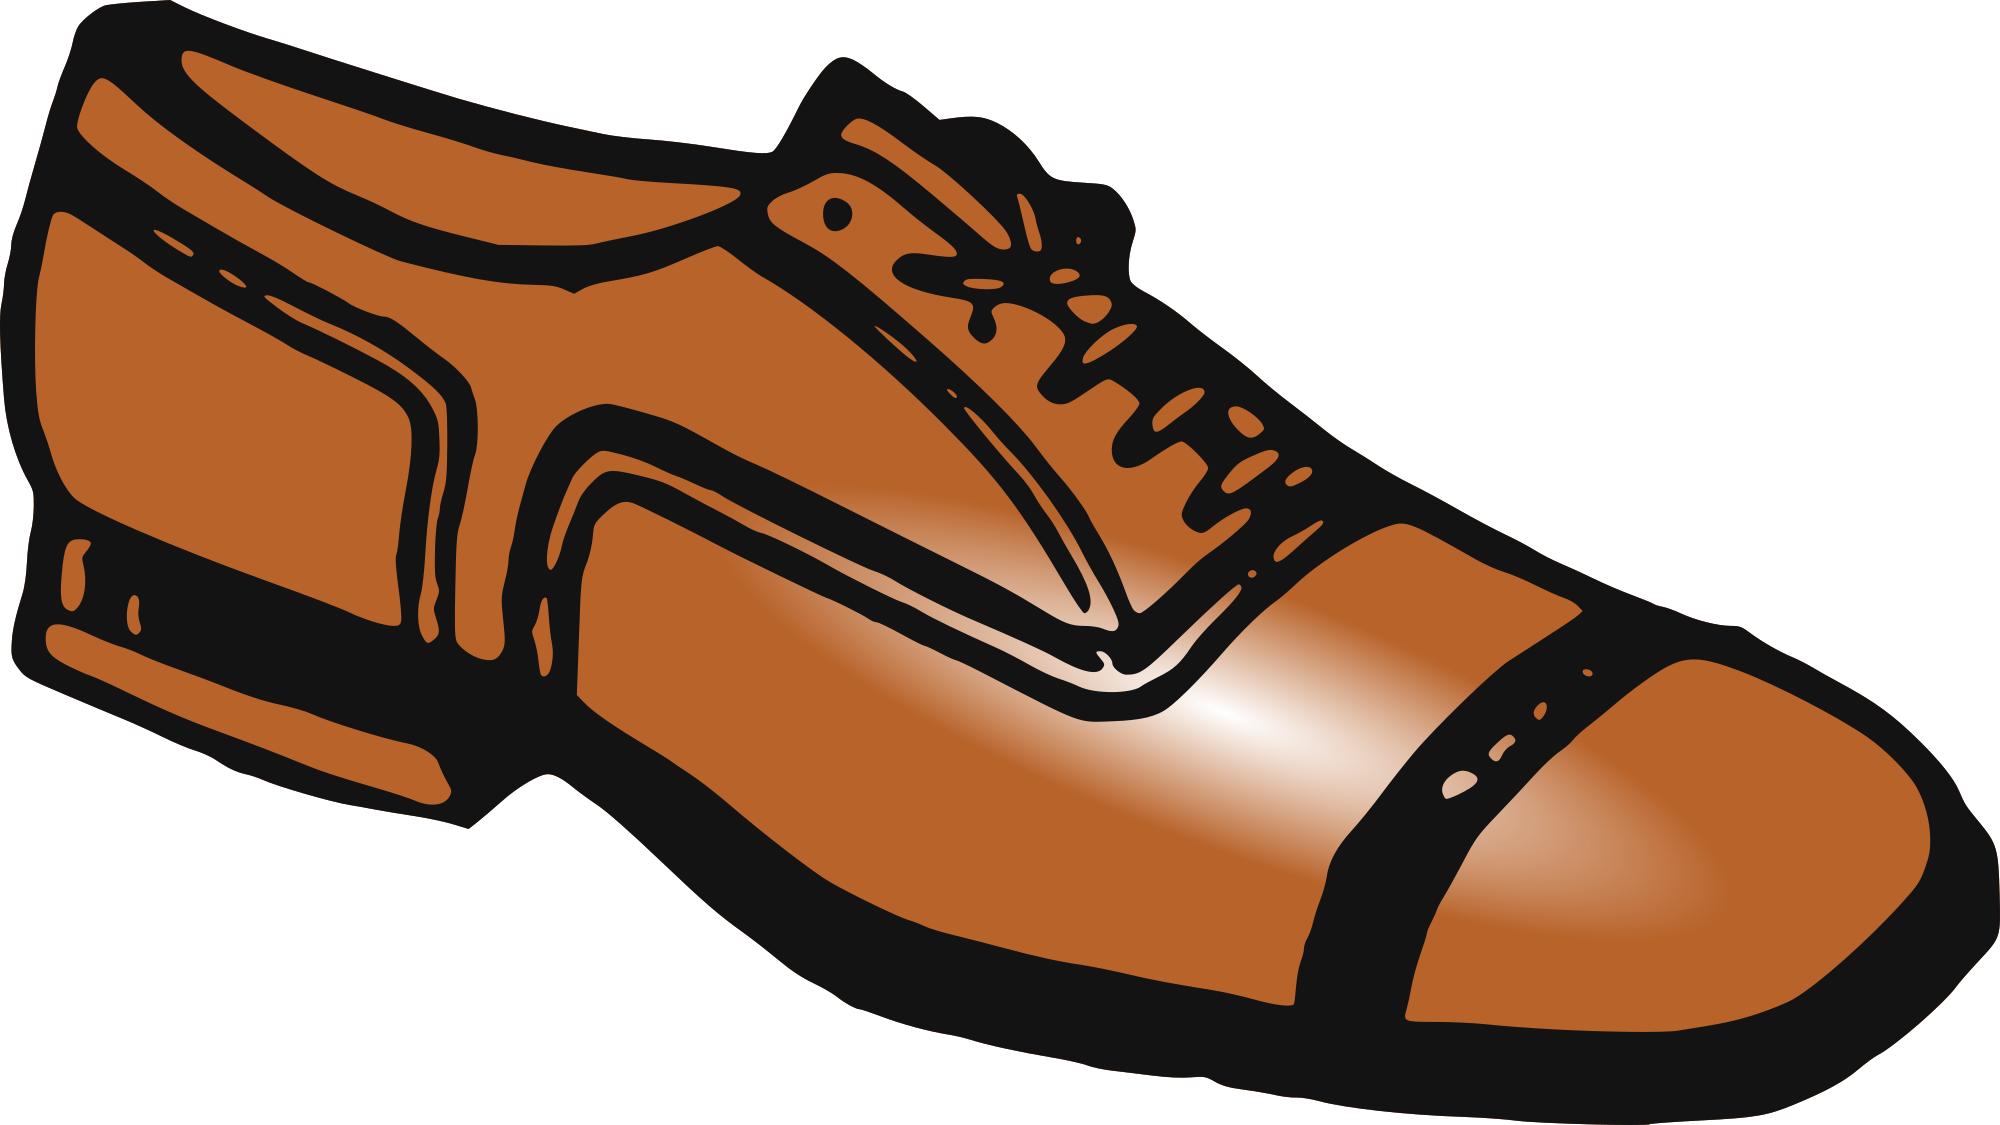 Tying shoes clipart on transparent.